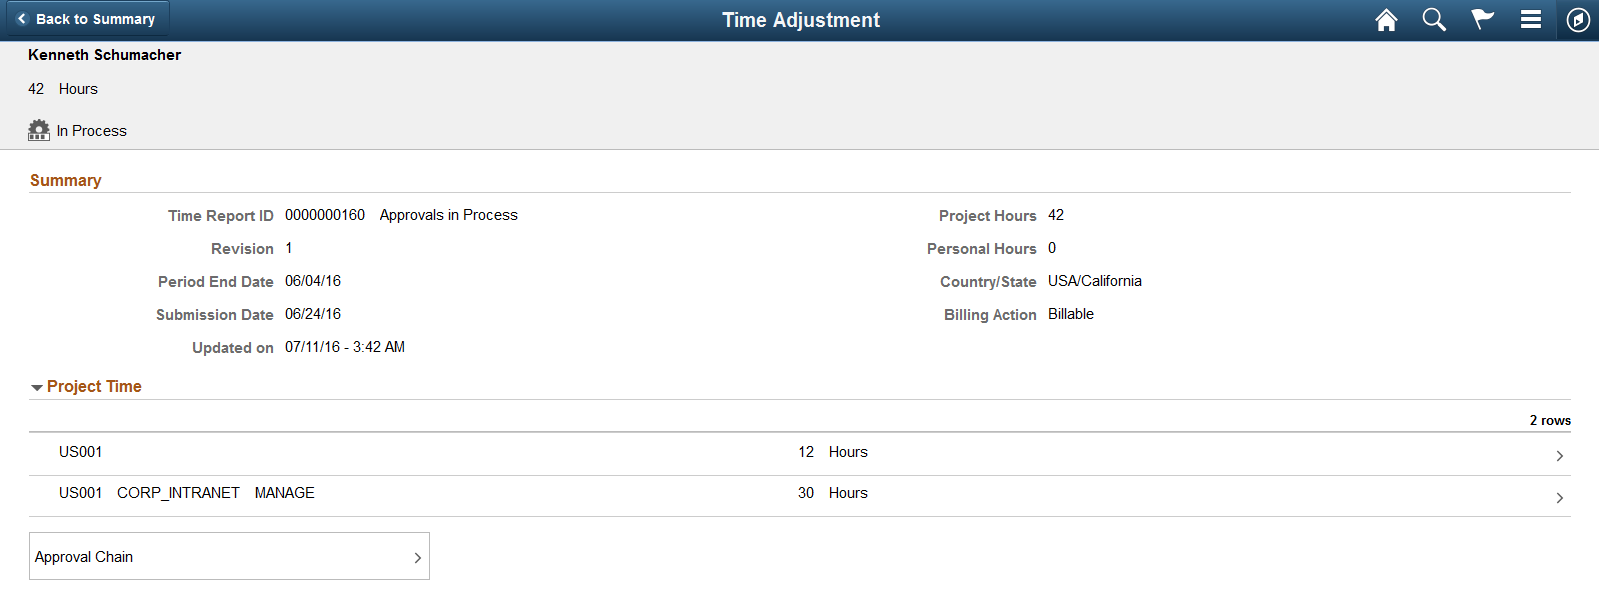 Approval History - Time Adjustment Page (Header Approval)